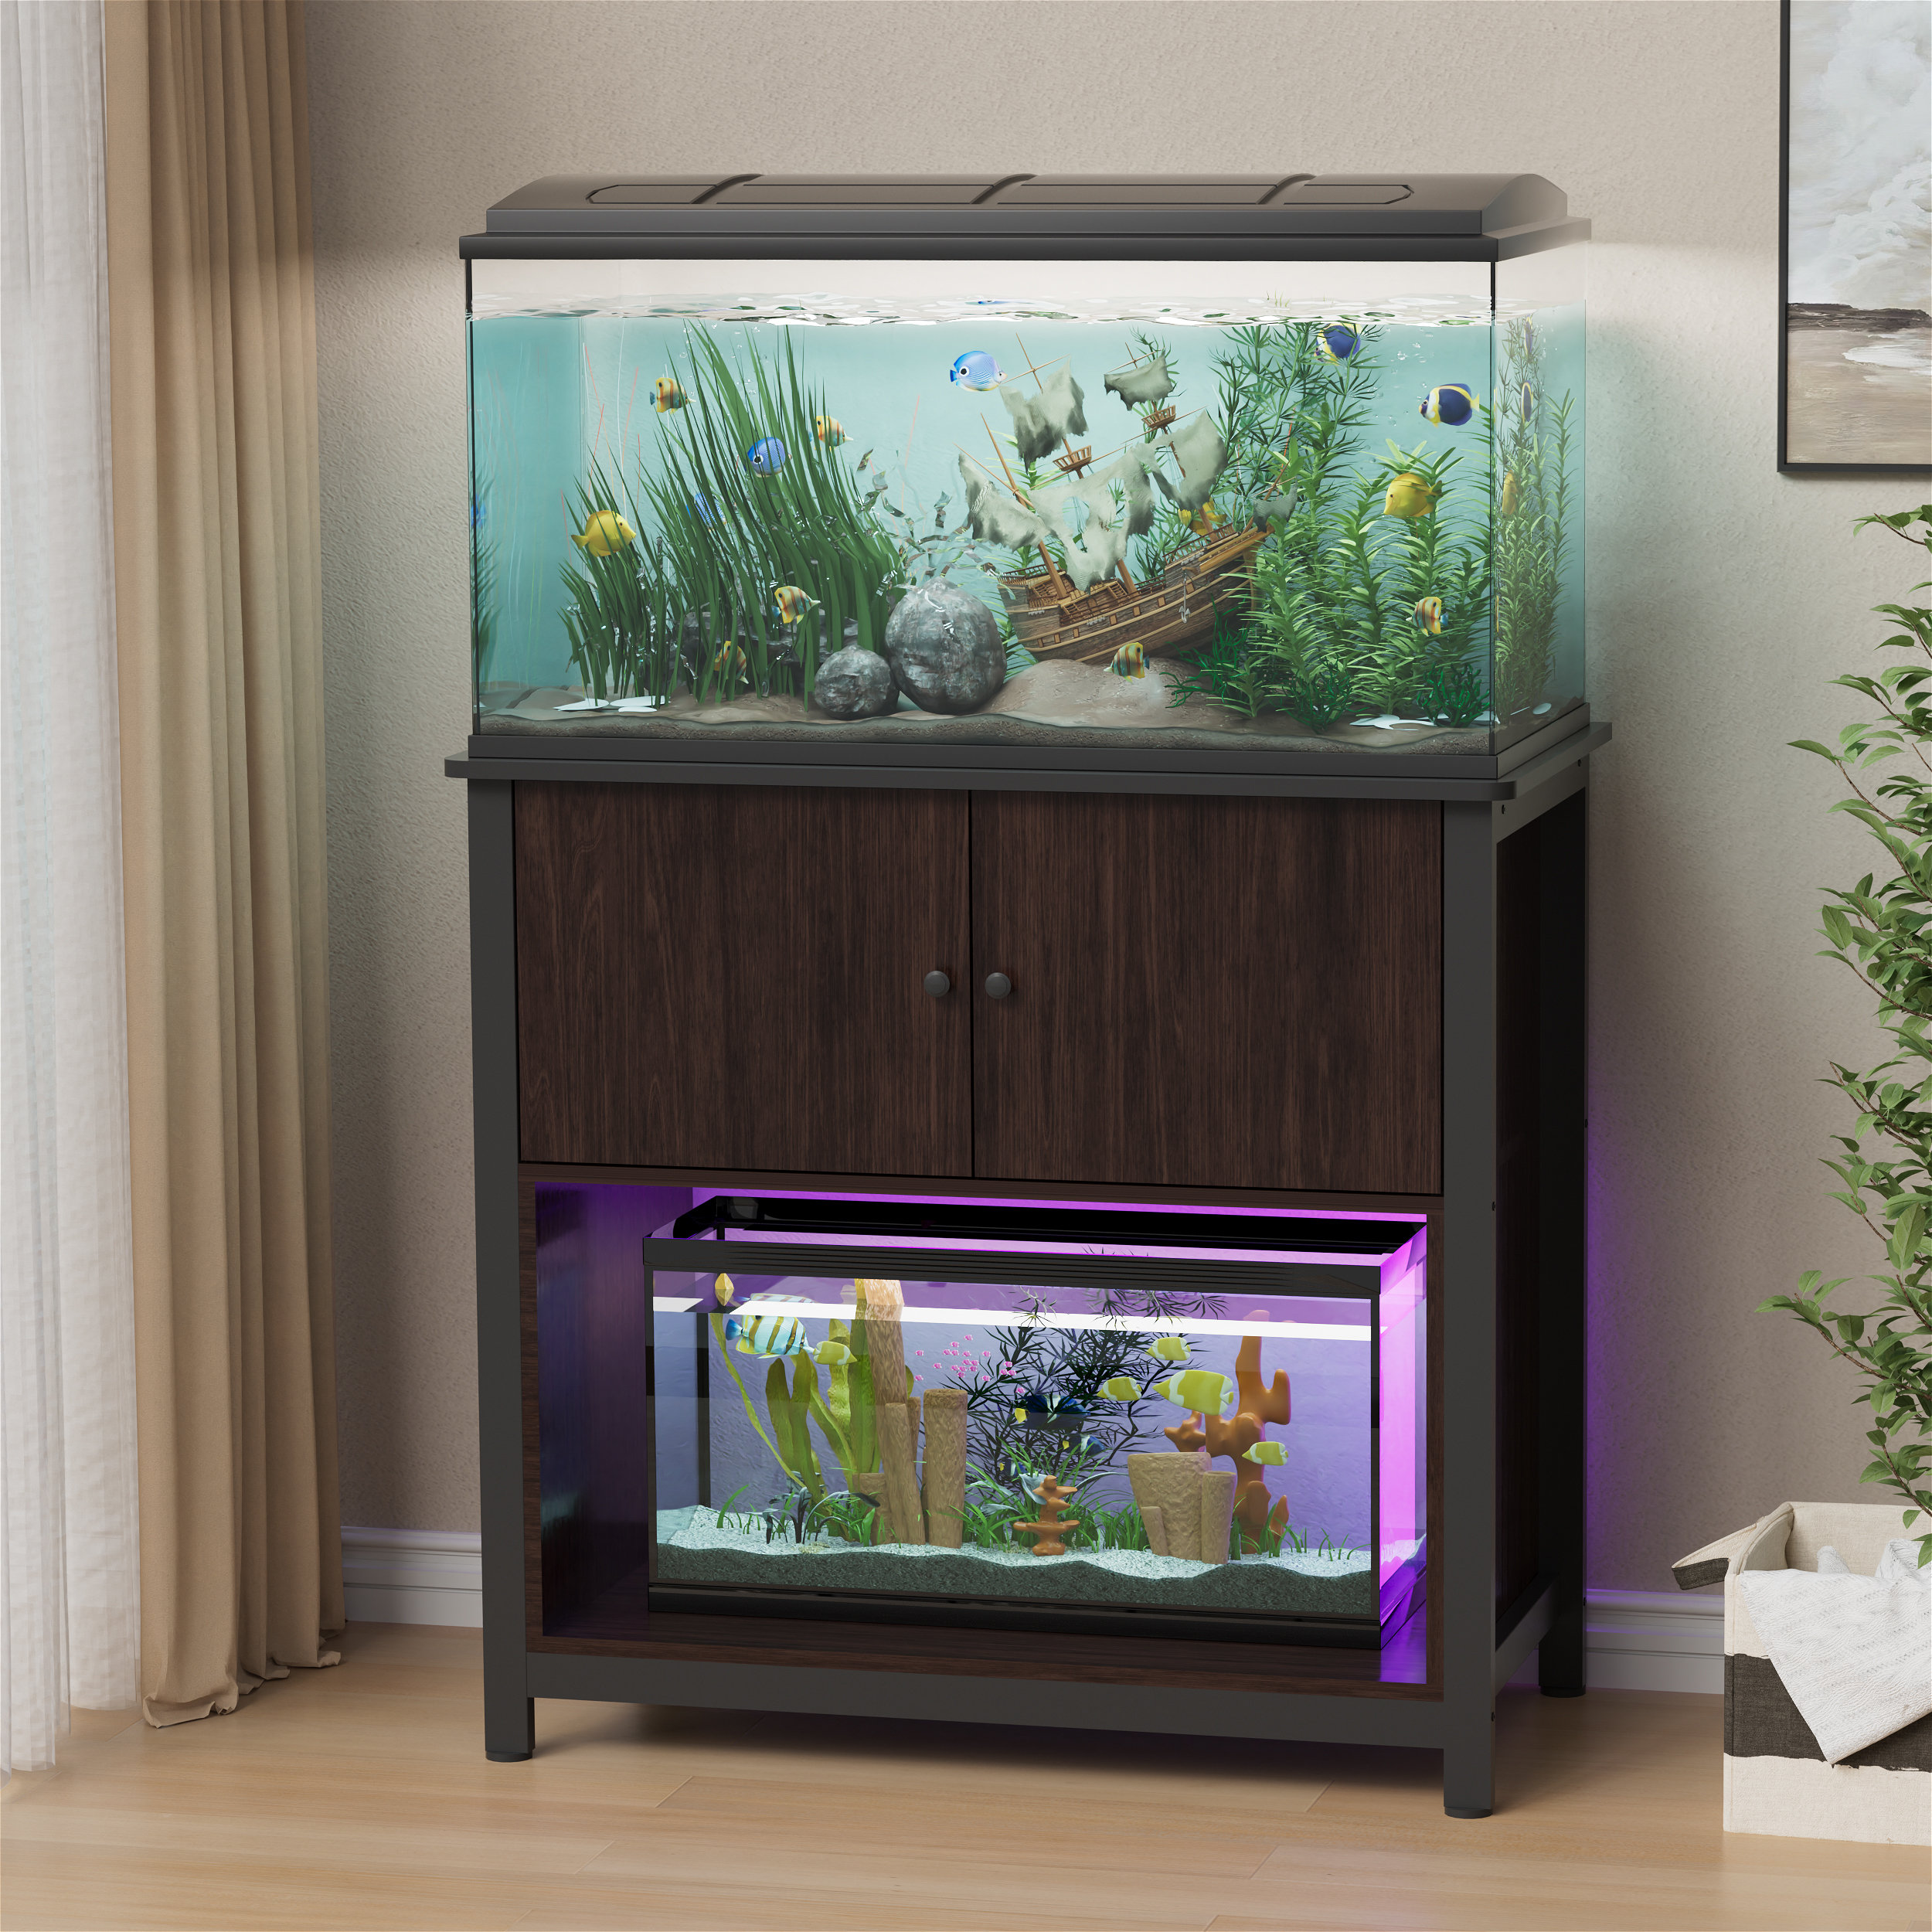 BRAND NEW** LARGE Fish Tank Aquarium & Stand: Heater, Filter & More  Included